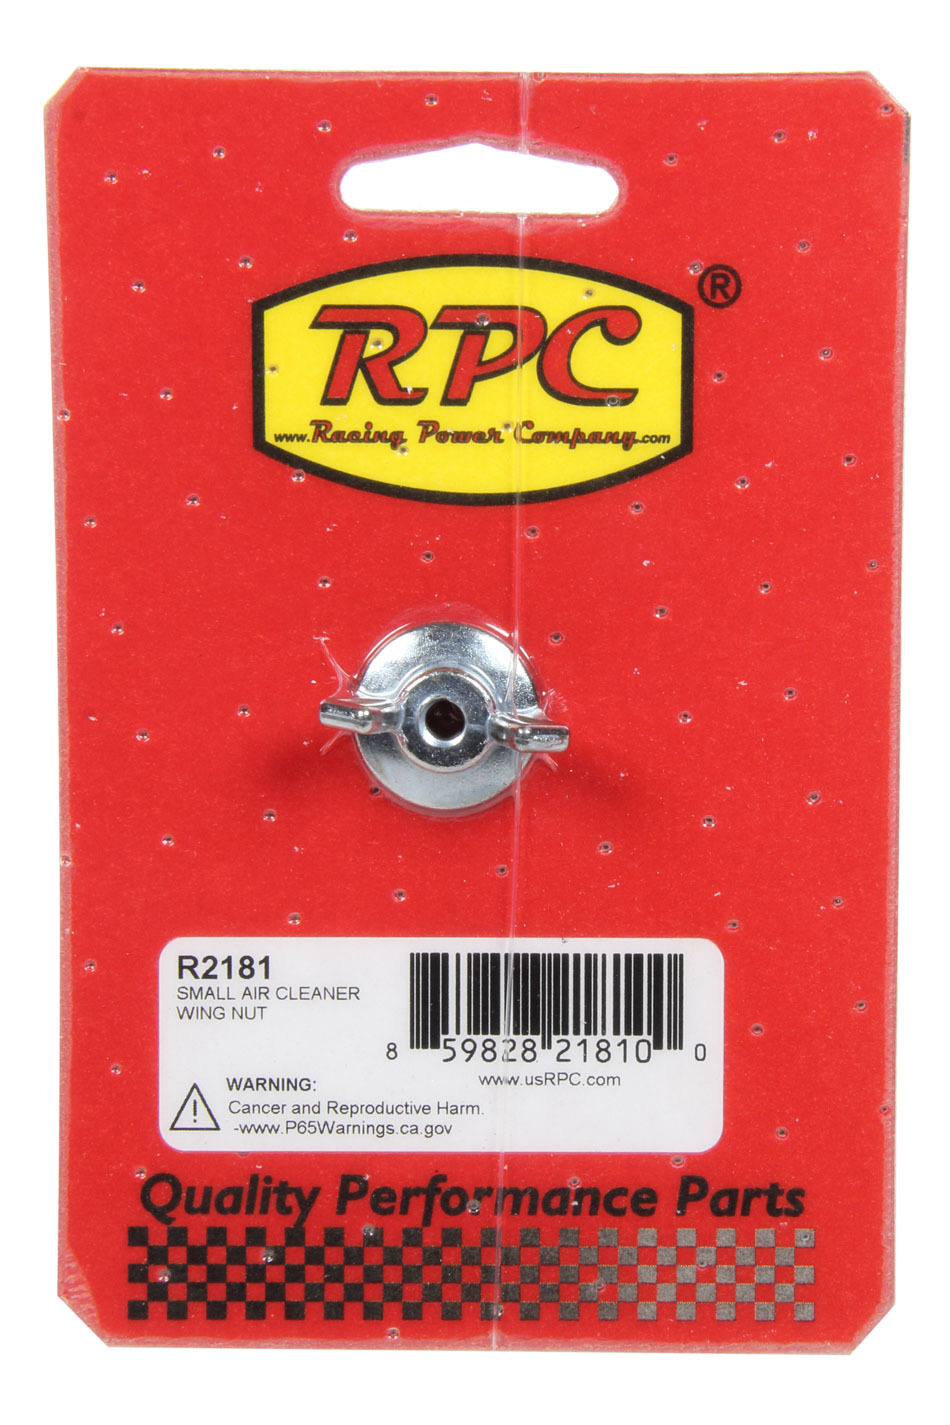 Small Air Cleaner Wing Nut - R2181